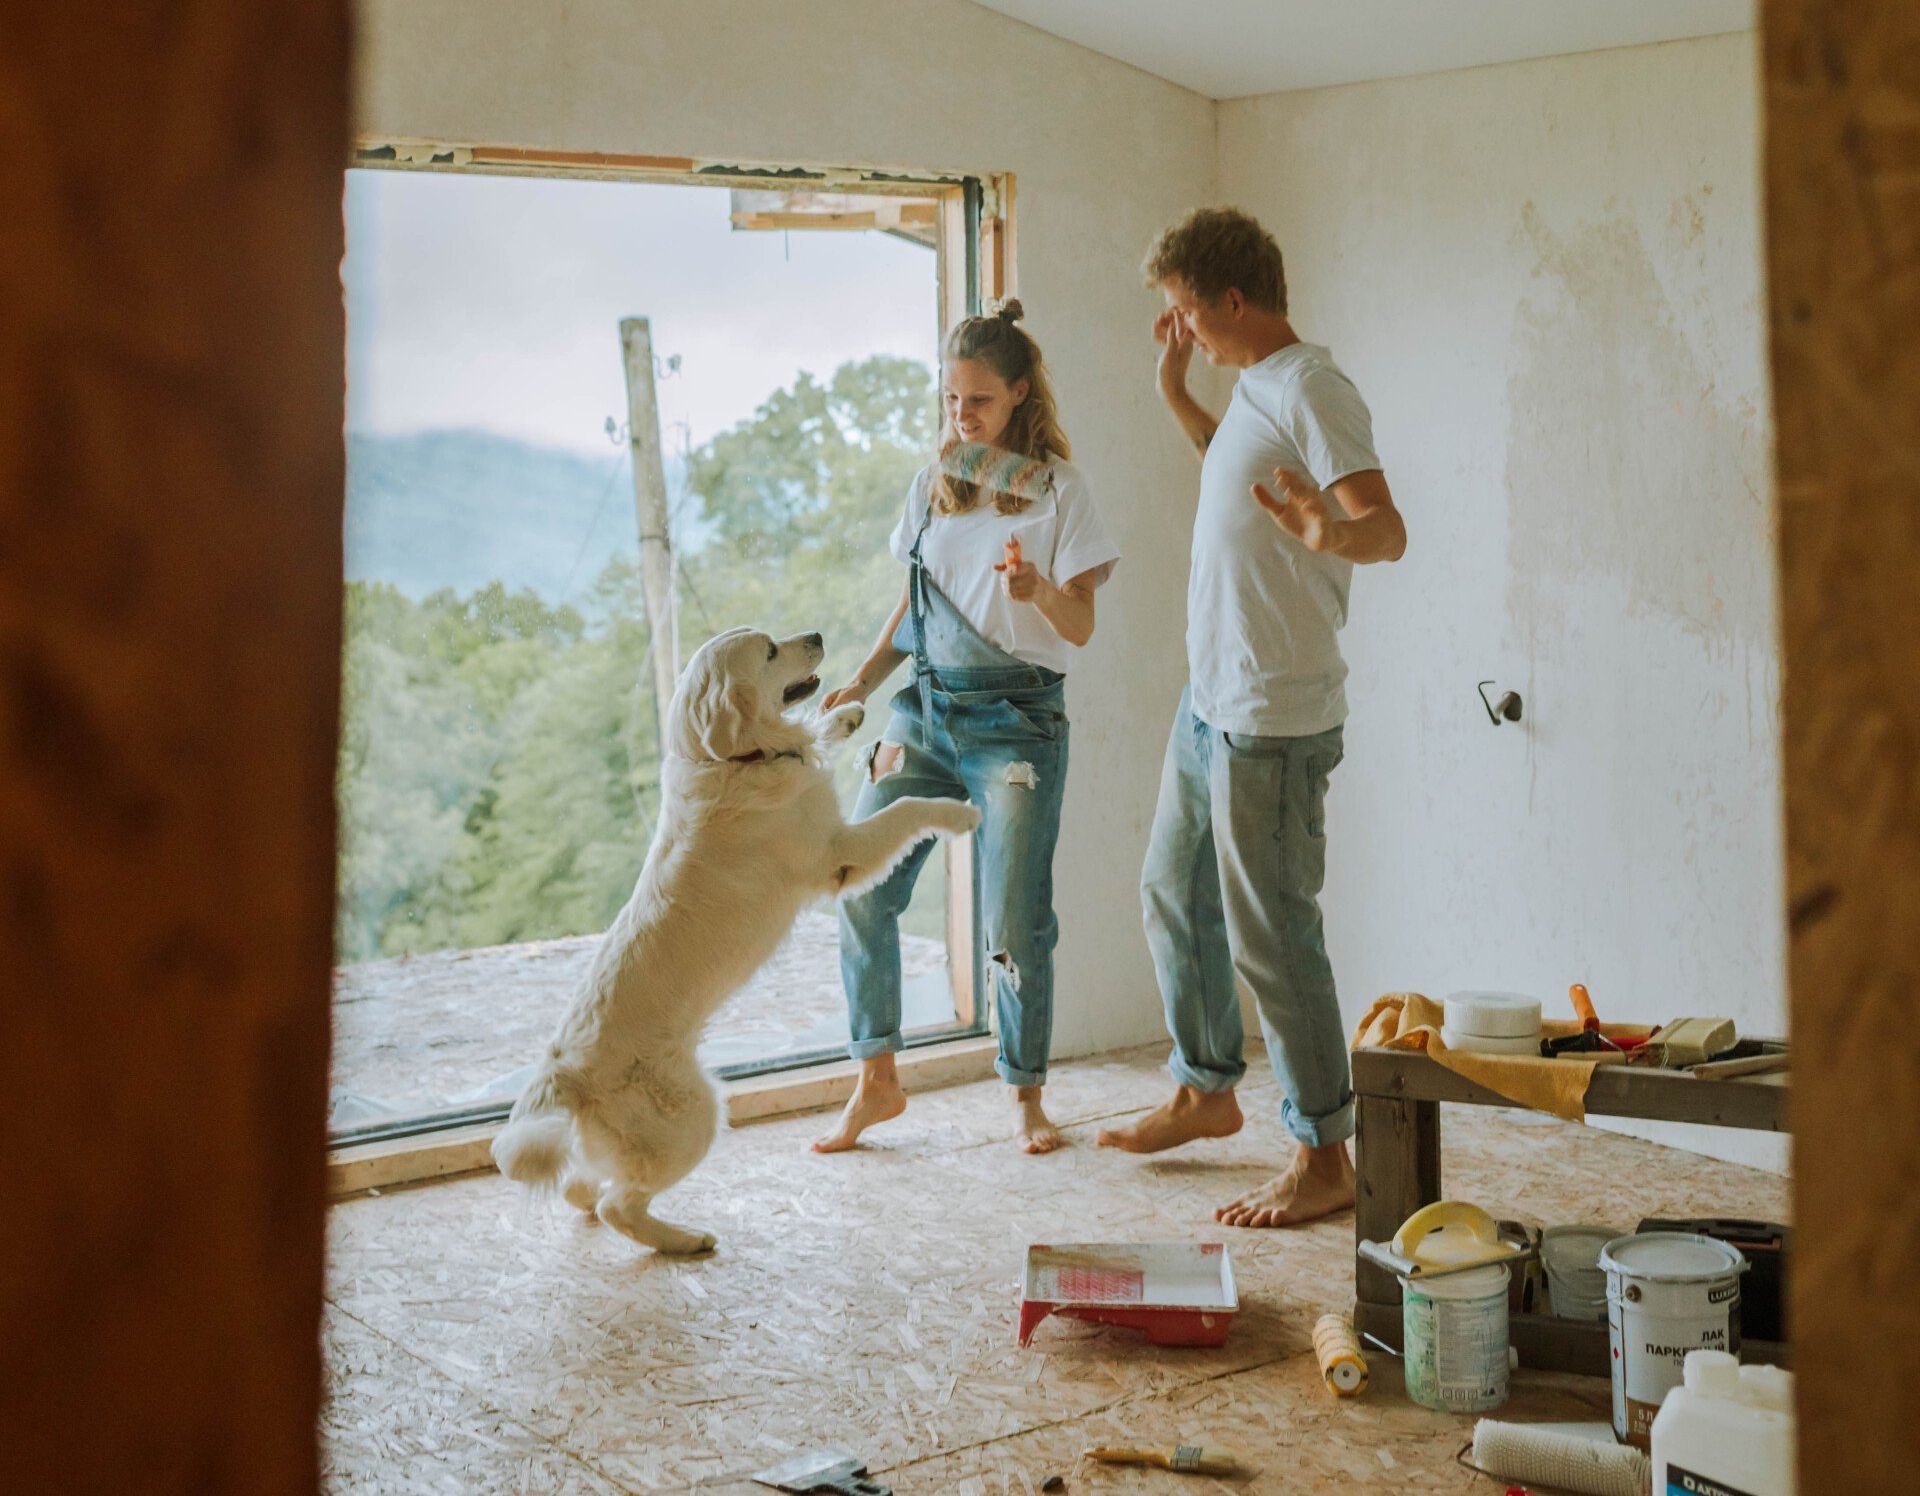 Two people and a dog renovating their home's interior.